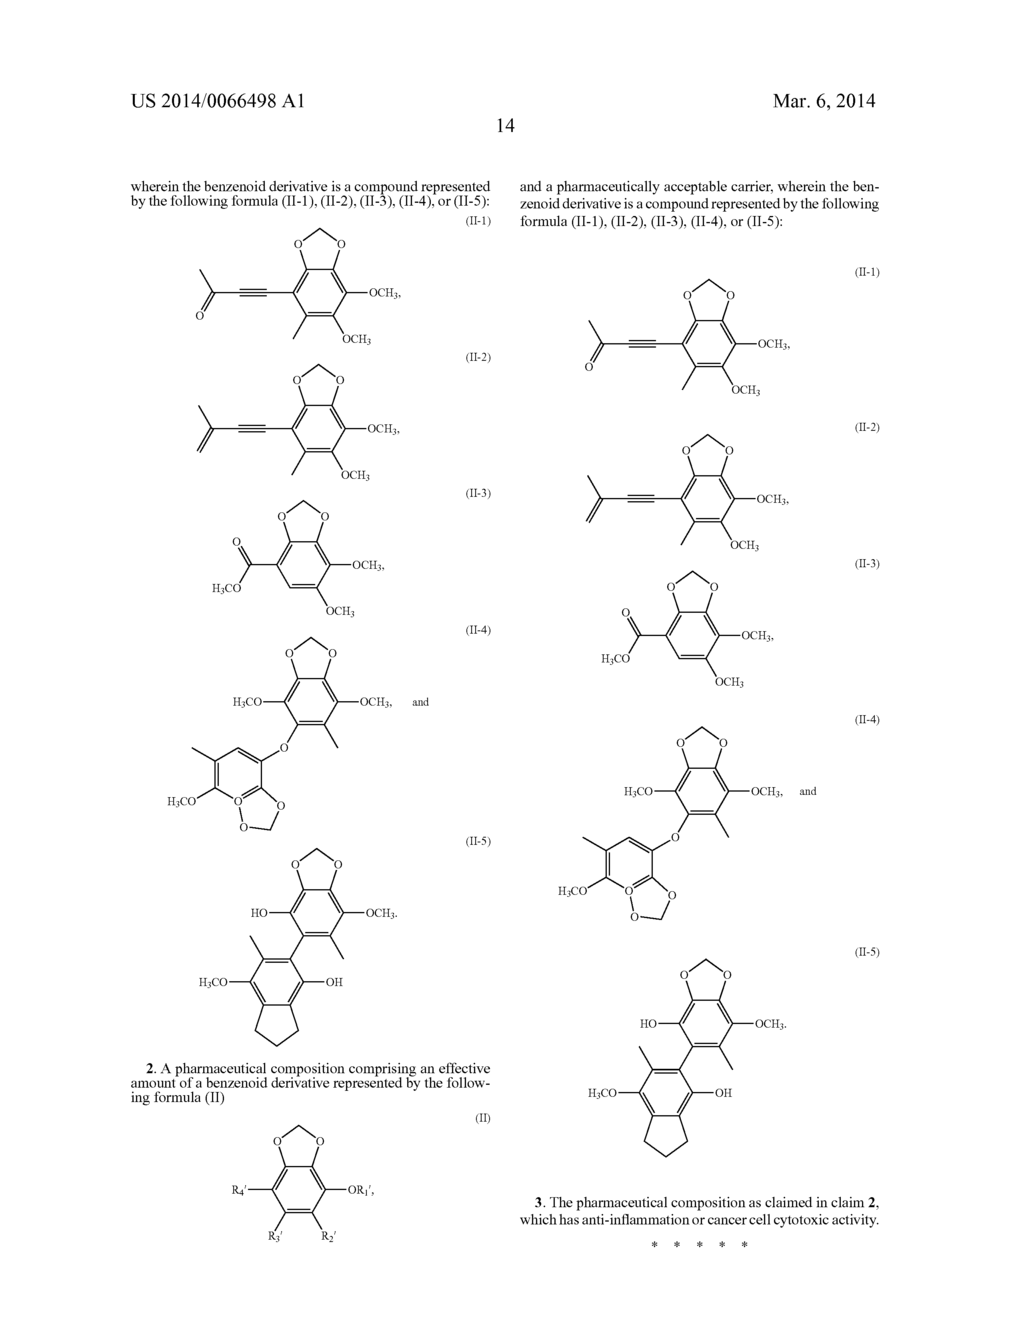 TRITERPENOID DERIVATIVES, BENZENOID DERIVATIVES, AND PHARMACEUTICAL     COMPOSITIONS CONTAINING THE SAME - diagram, schematic, and image 15